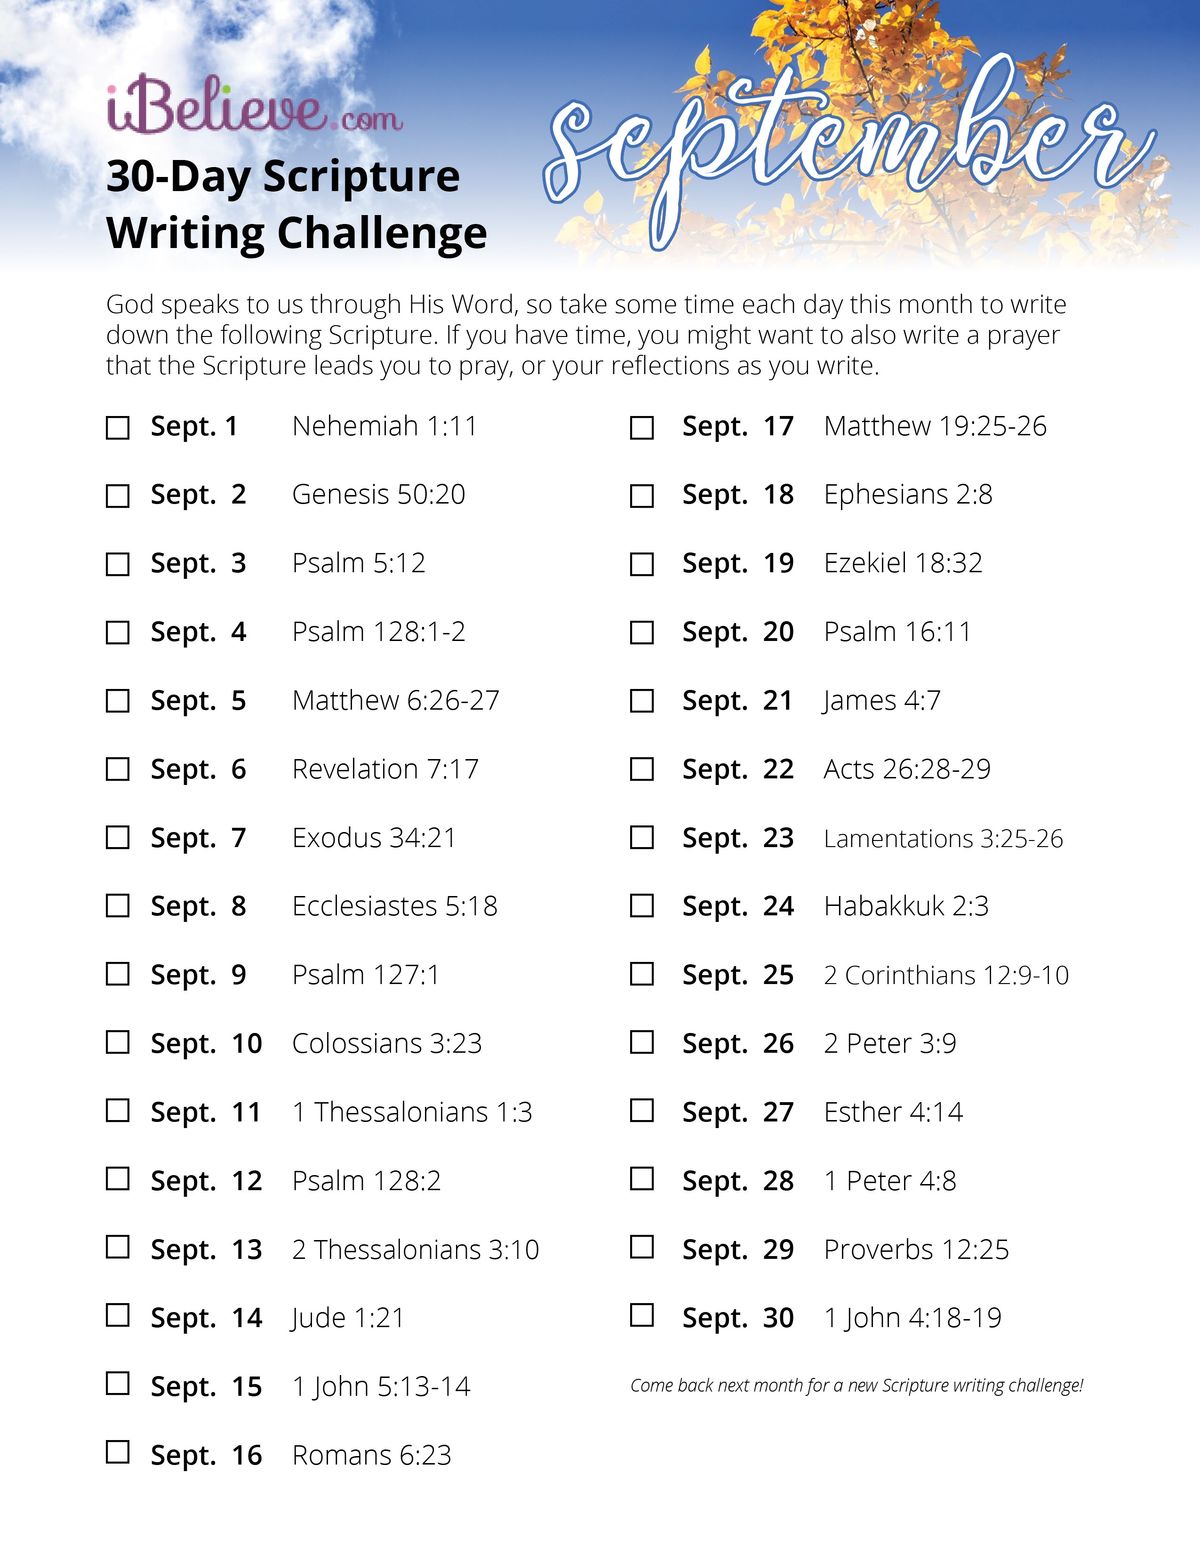 september 31 day scripture writing challenge